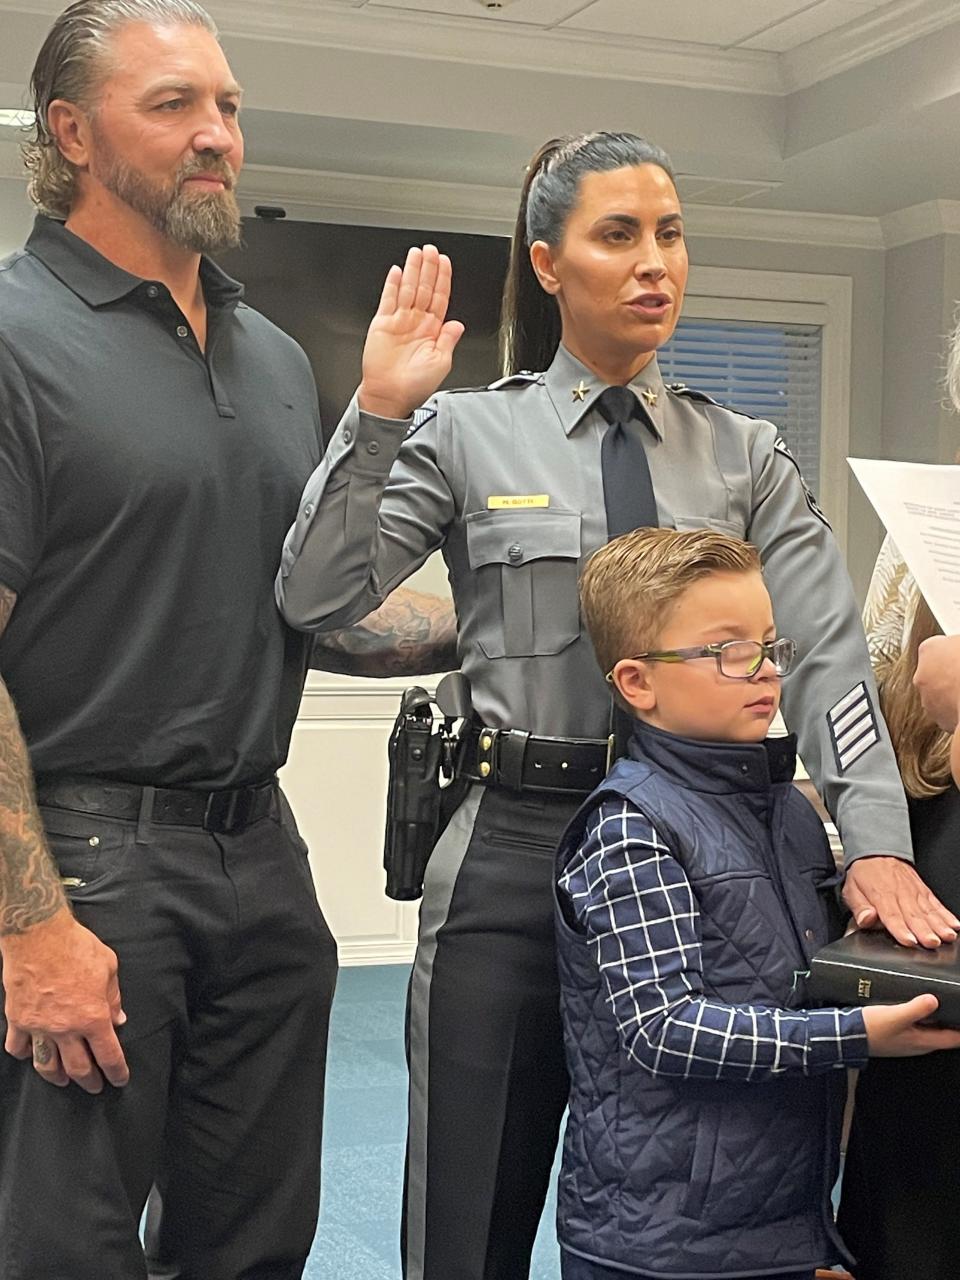 Marlowe Botti is sworn in as the new police chief at West Long Branch. Botti is the first female police chief in the borough's 115-year history. Standing next to her is her son Thomas and her husband Thomas Patten.